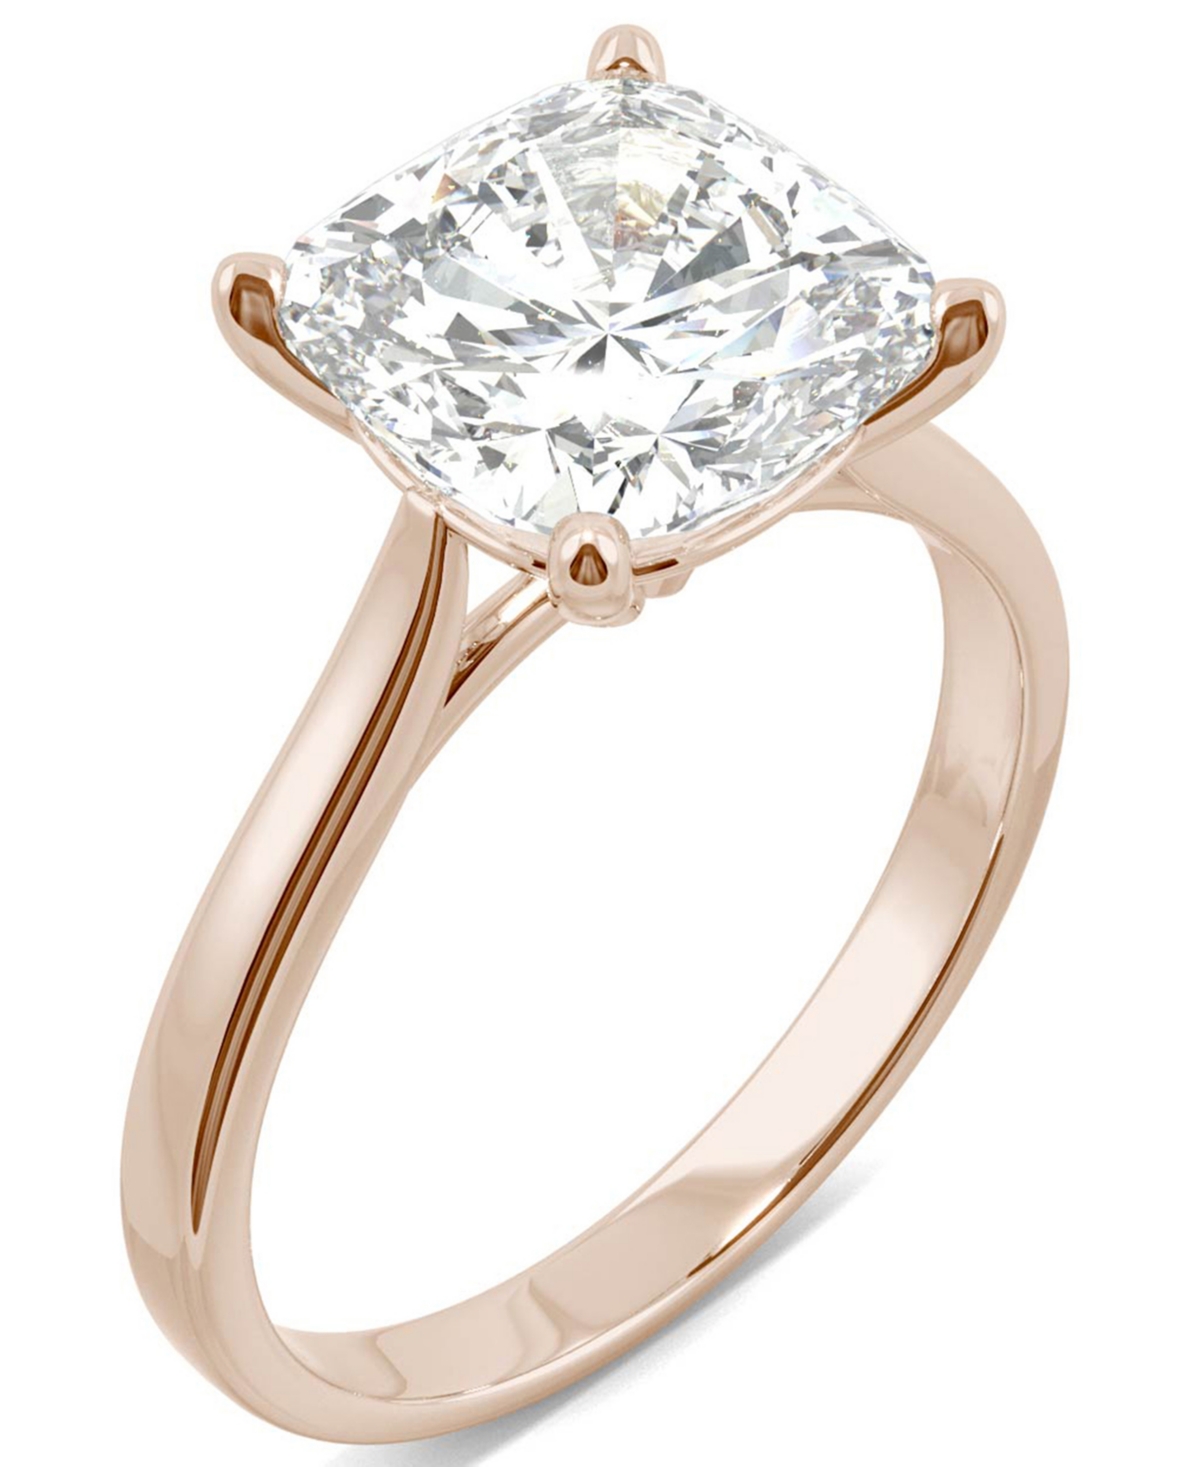 Charles & Colvard Moissanite Cushion Solitaire Ring (3-1/3 ct. tw.) in 14k White, Yellow or Rose Gold